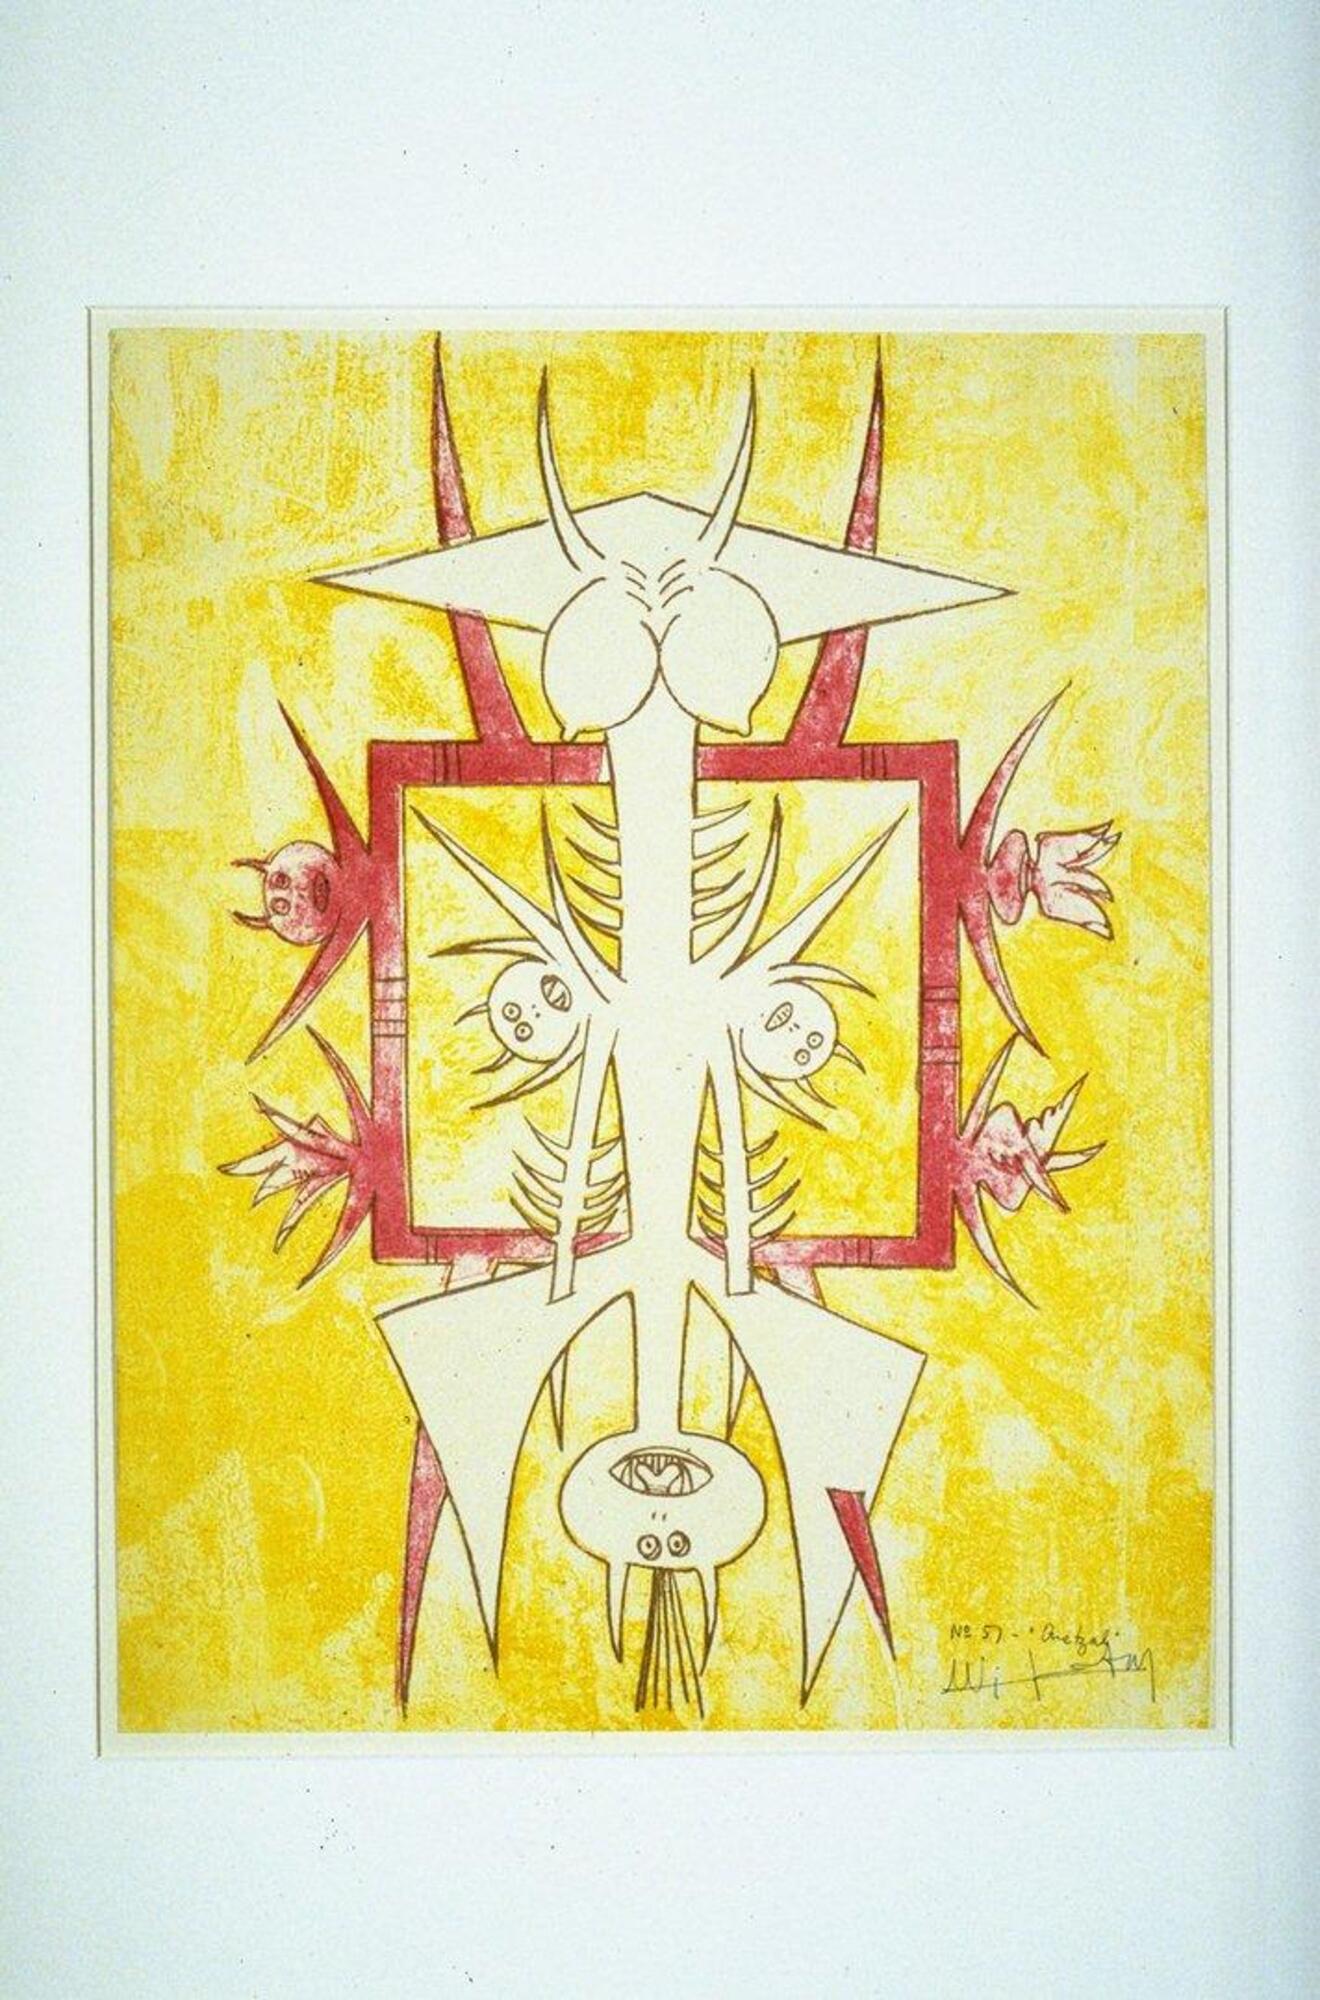 This color lithograph has a bright yellow background with figures in red and white at the center. Horizontally oriented at the center is a large white semi-geometric creature with three heads—one at the bottom and two at the flanks—that is capped with horns and breasts. There is a red box-like figure in the background that has a horned head and a series of horns, wings, and flames emanating from it. The print is numbered, titled and signed (l.r.) in pencil: "no 57 - "Quetzal" / Wilfredo Lam".